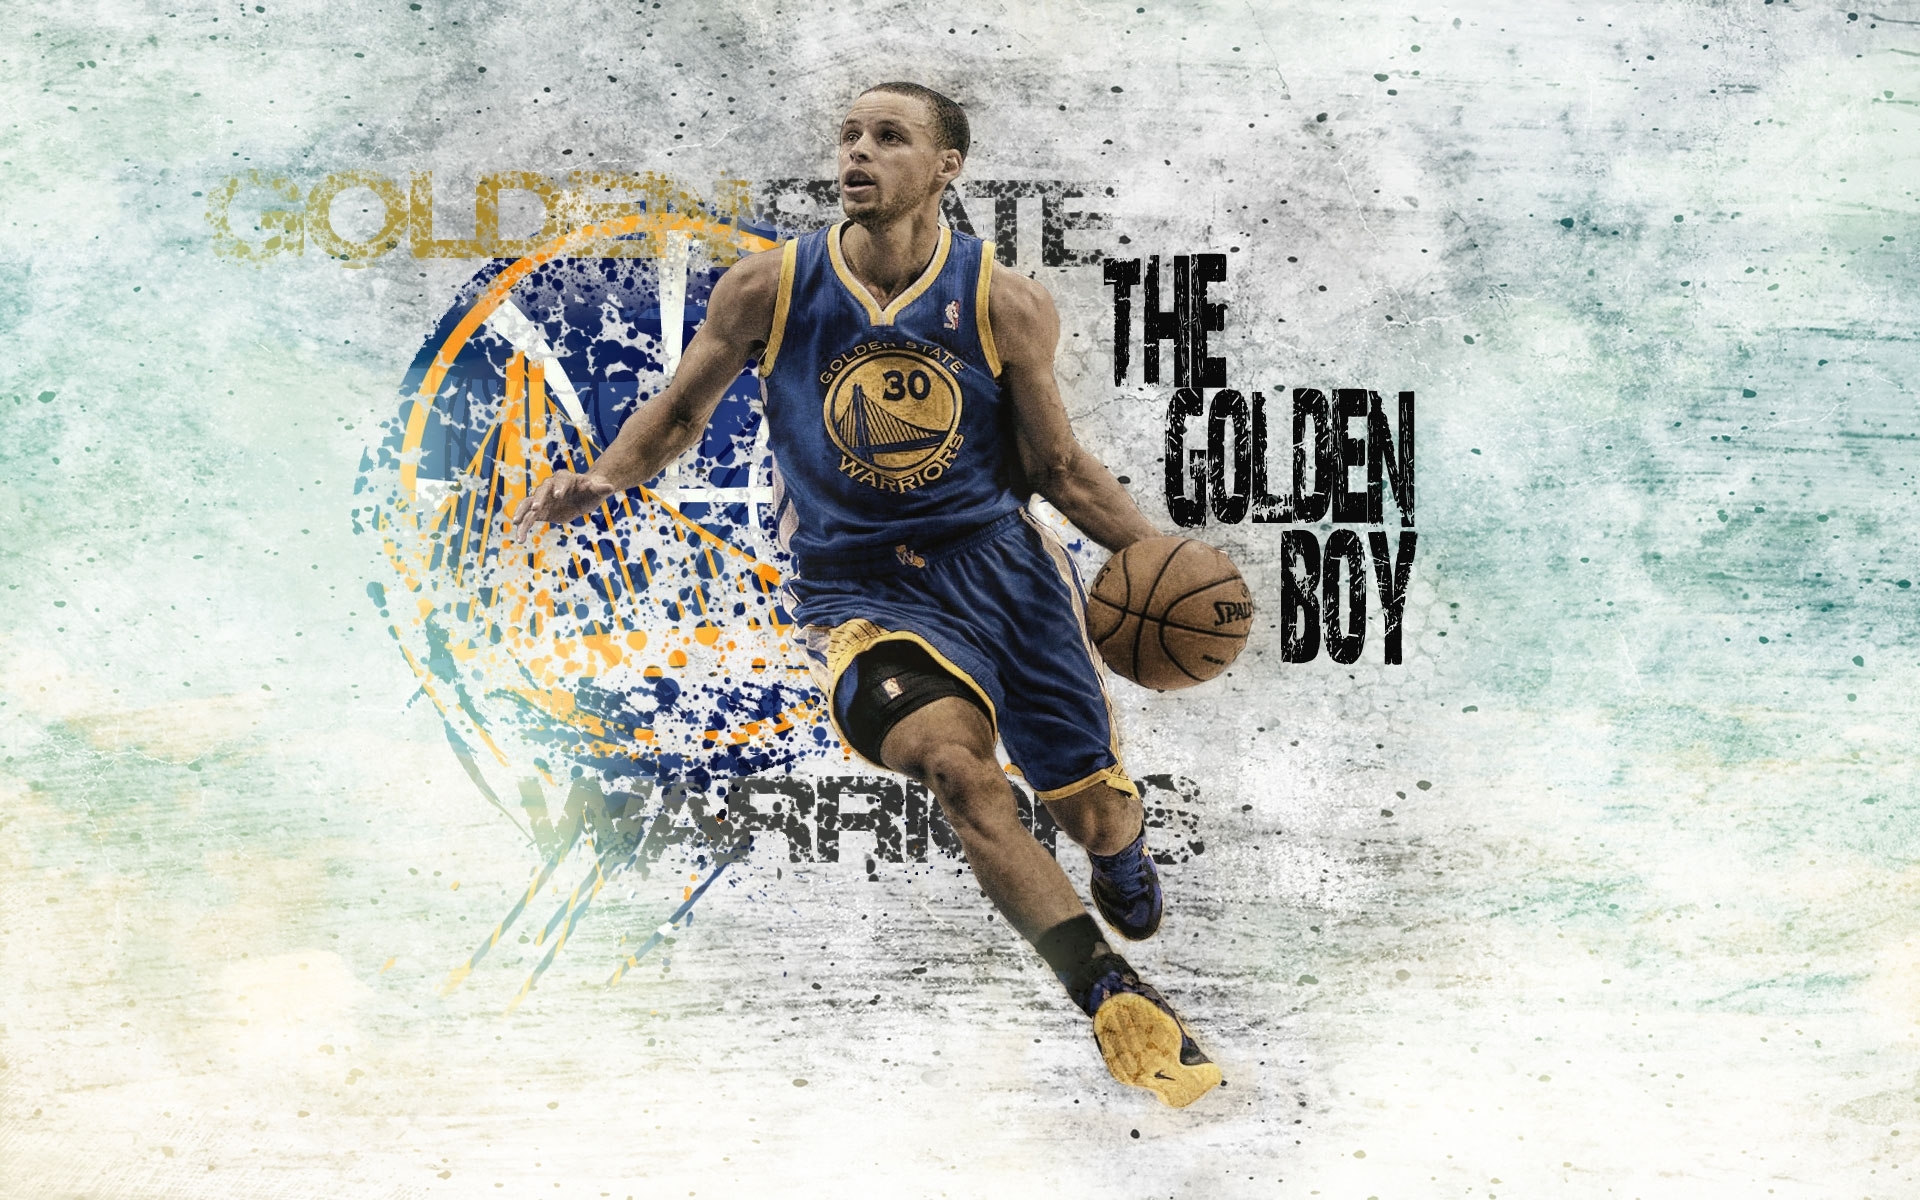 10 Best Stephen Curry Wallpaper Hd FULL HD 1080p For PC Background